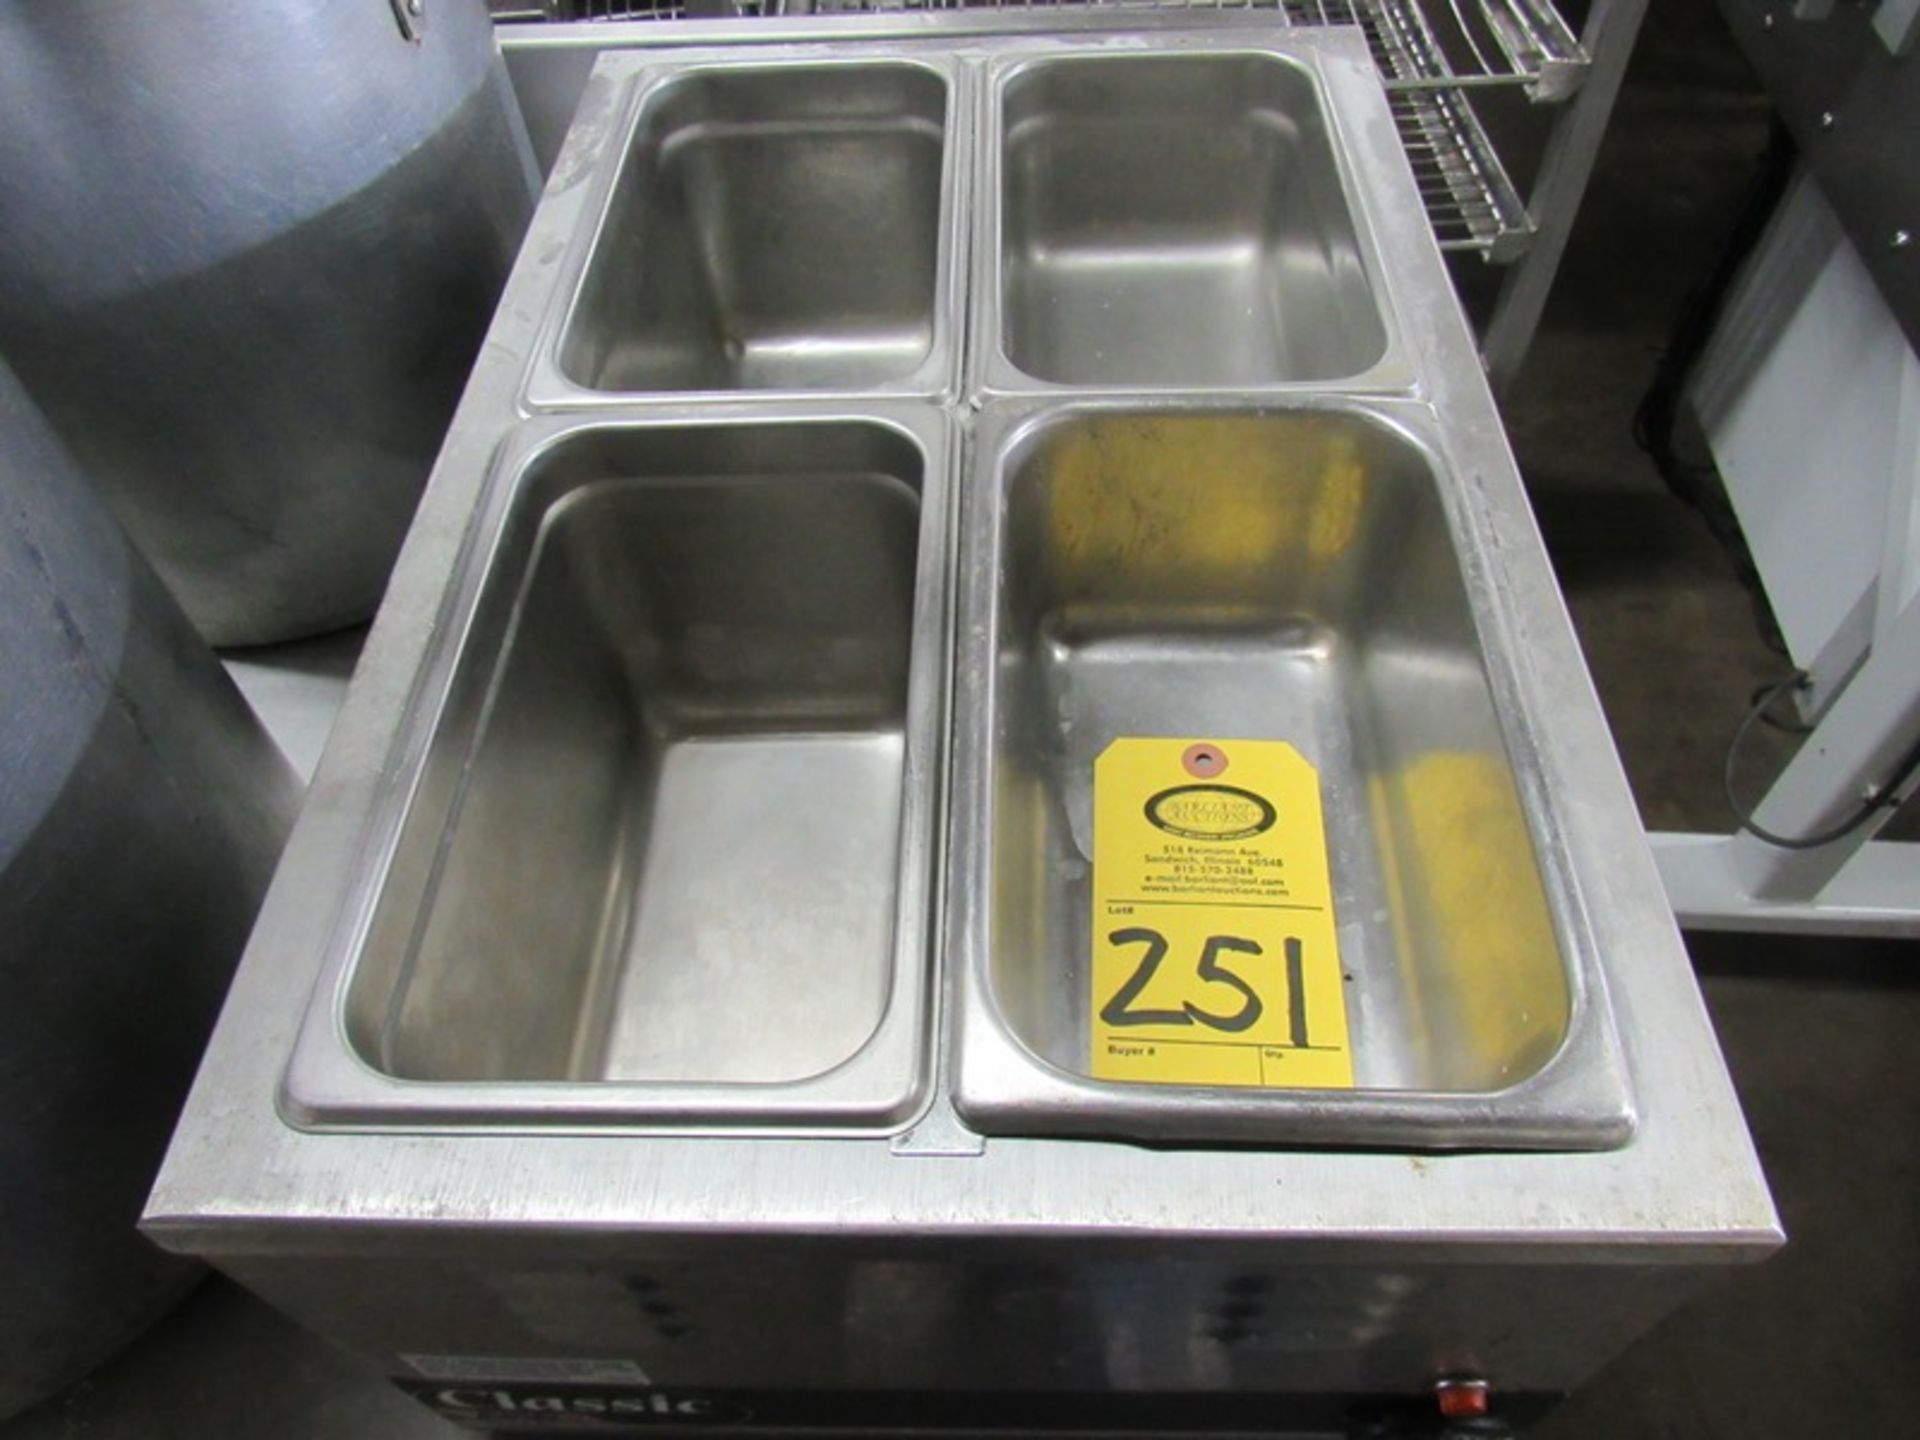 APW Mdl. W3V Counter Top Food Warmer, 12" X 20" (Located in Sandwich, IL) - Image 2 of 2